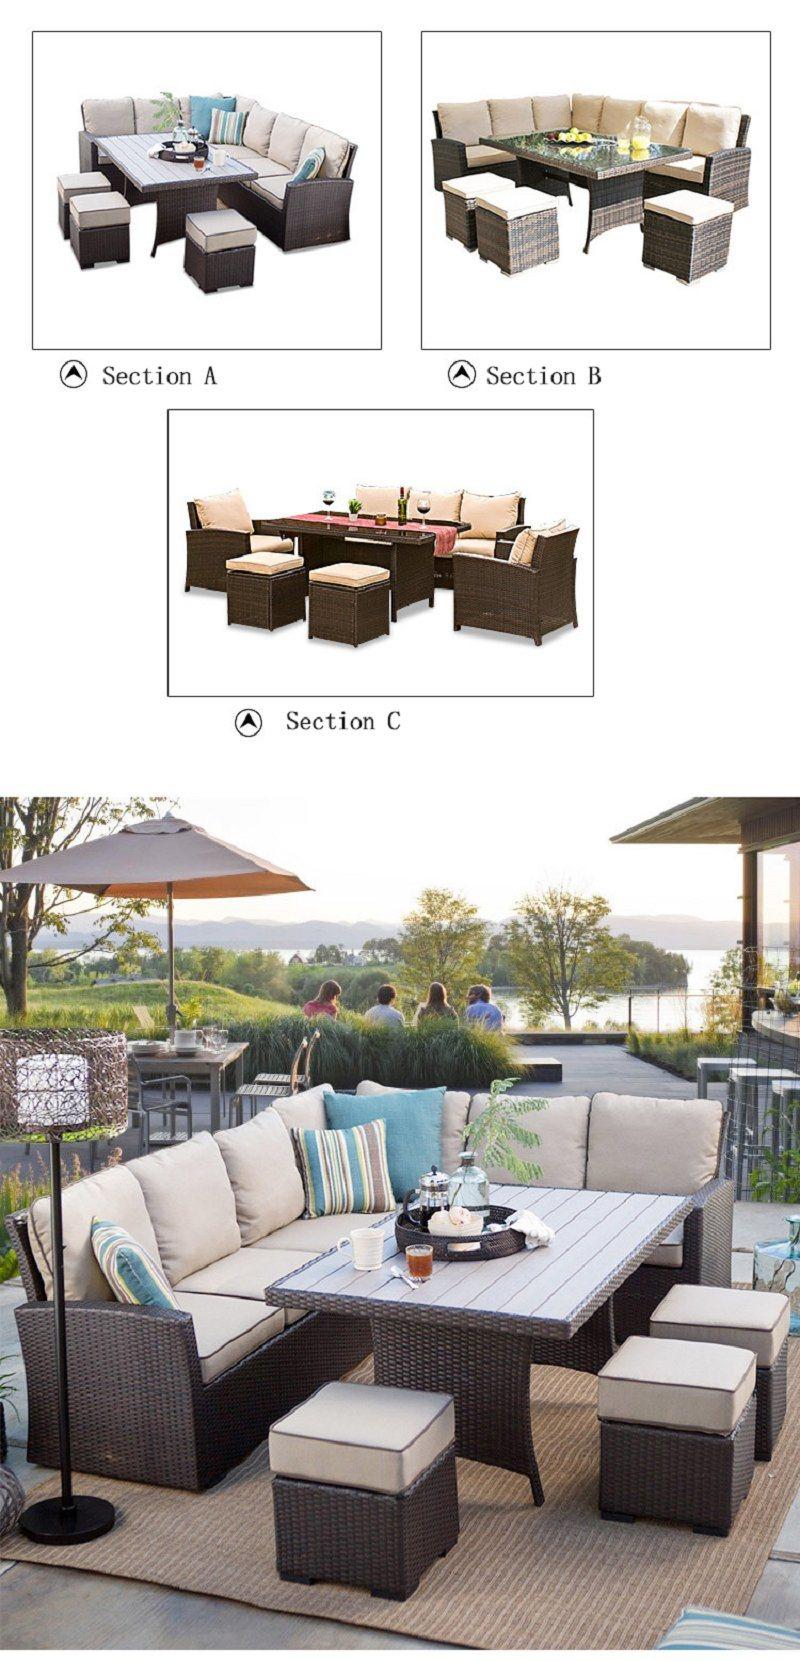 Outdoor Furniture Patio Rattan, PE Wicker Chairs Sectional Sofa Couch Conversation Sets